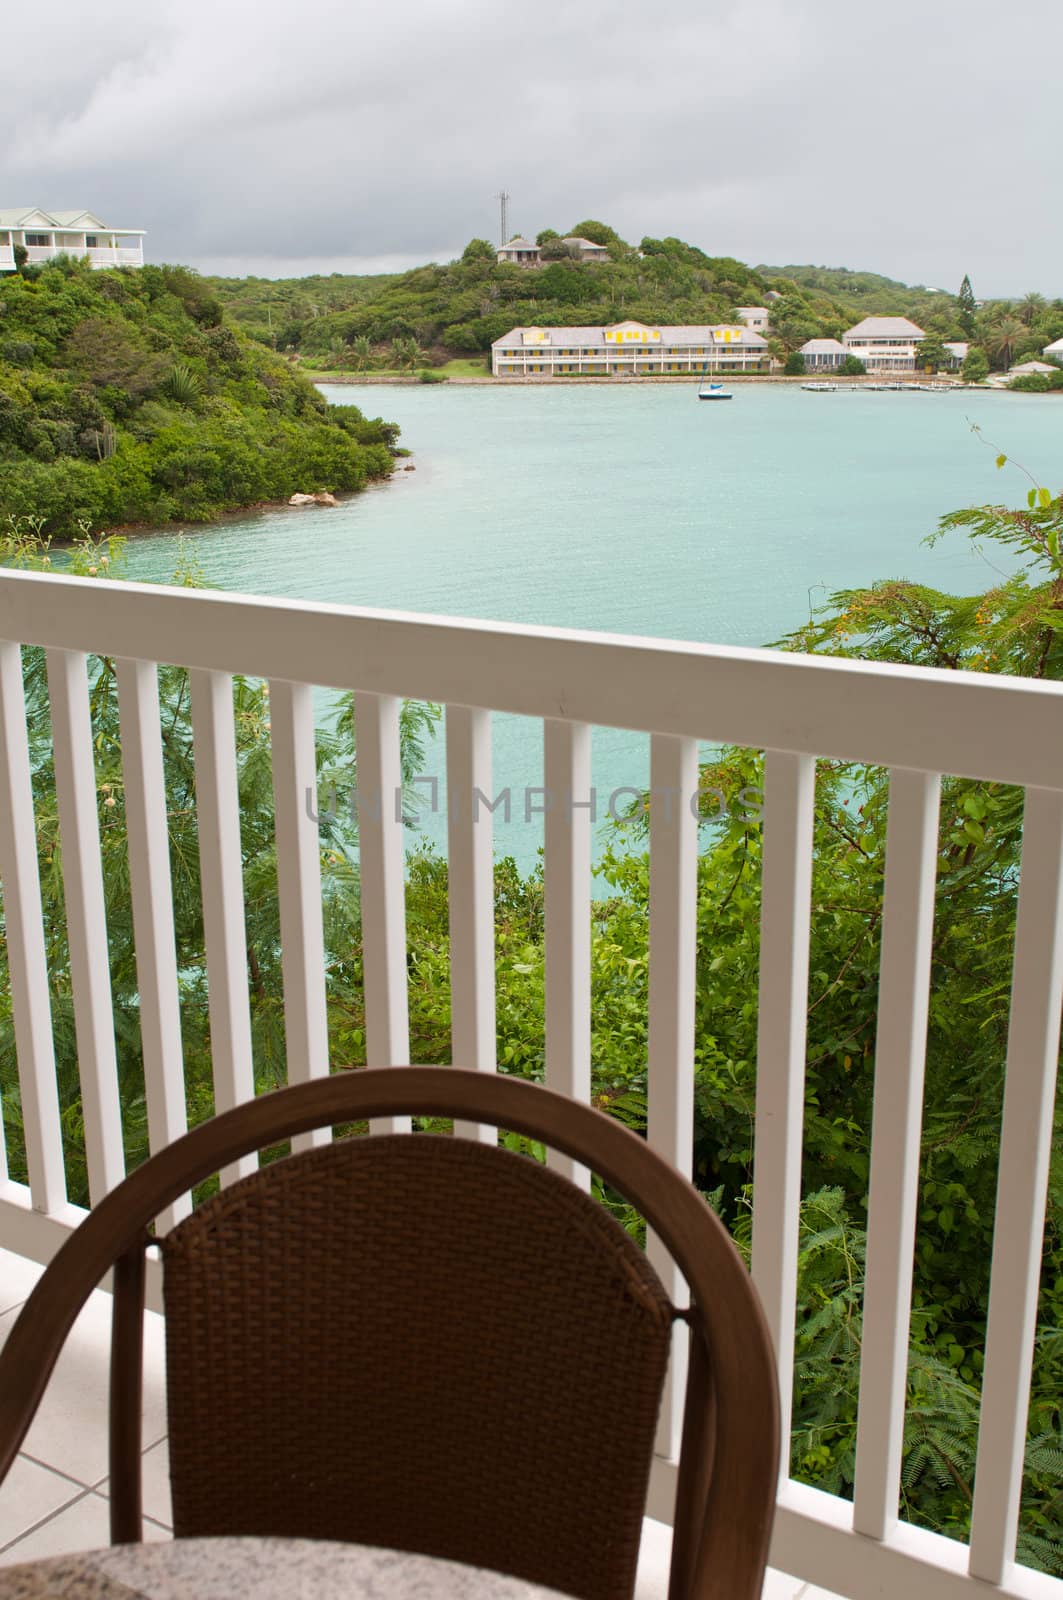 balcony view of Long Bay with resort villas and seascape in Antigua (overcast weather)